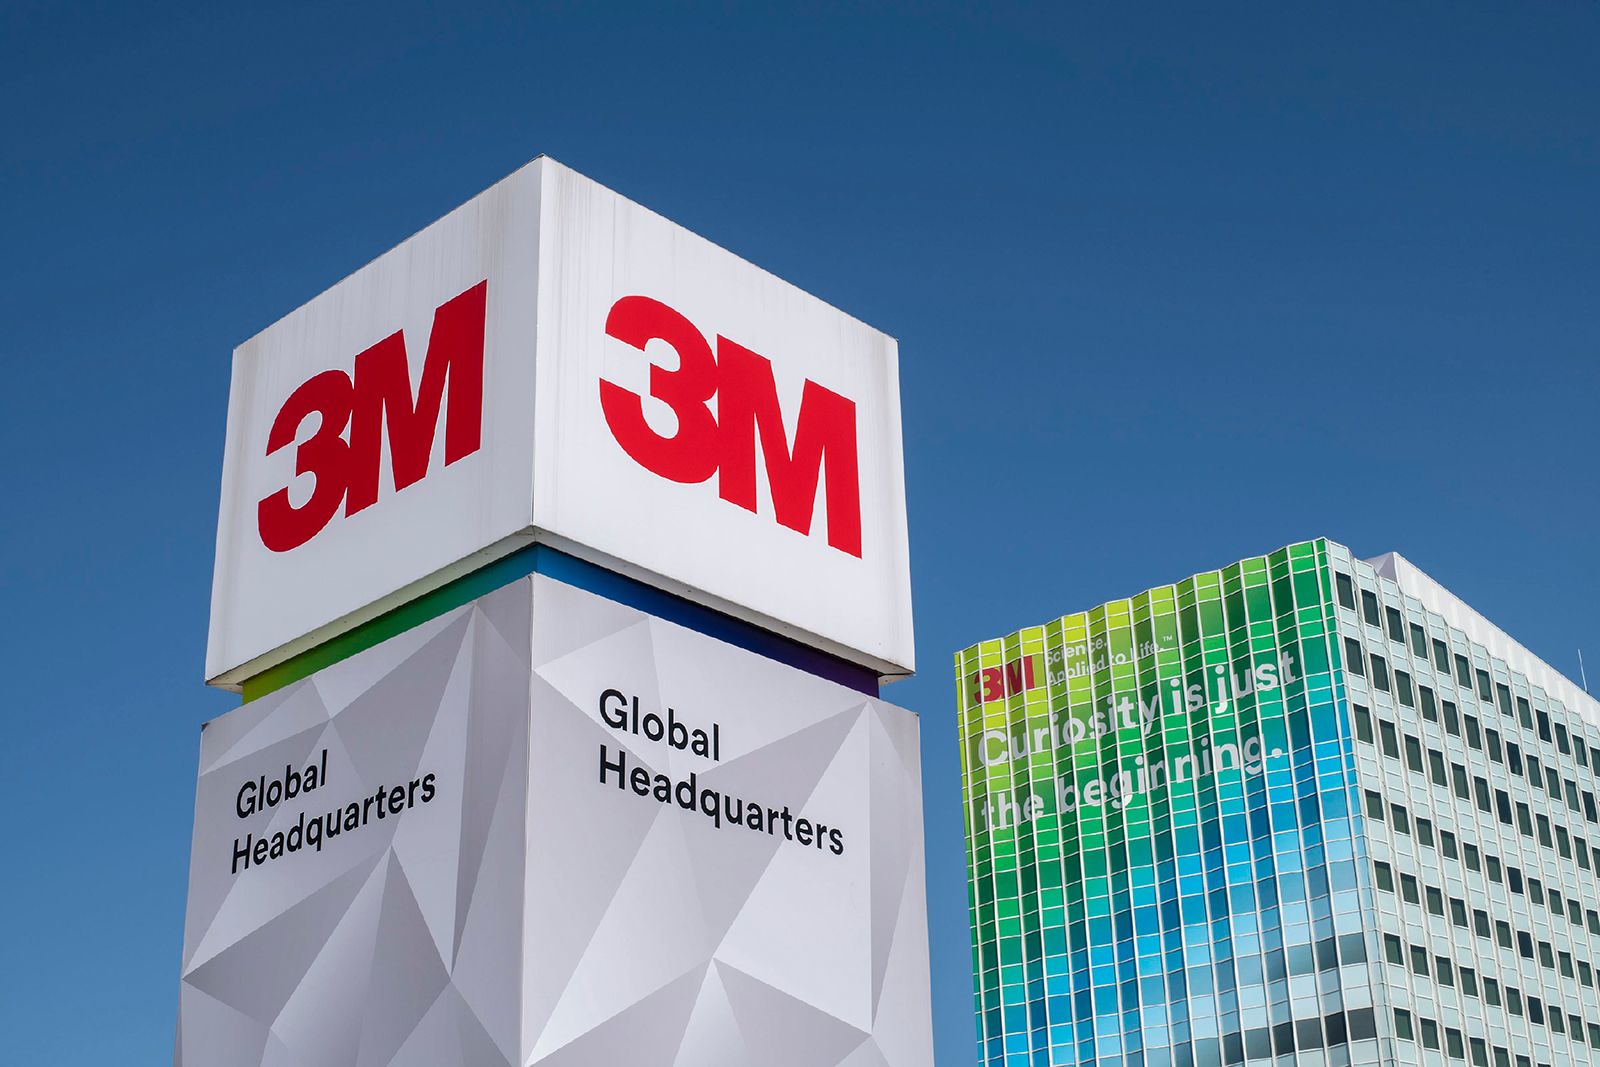 3M agrees to pay almost $10 million to settle apparent Iran